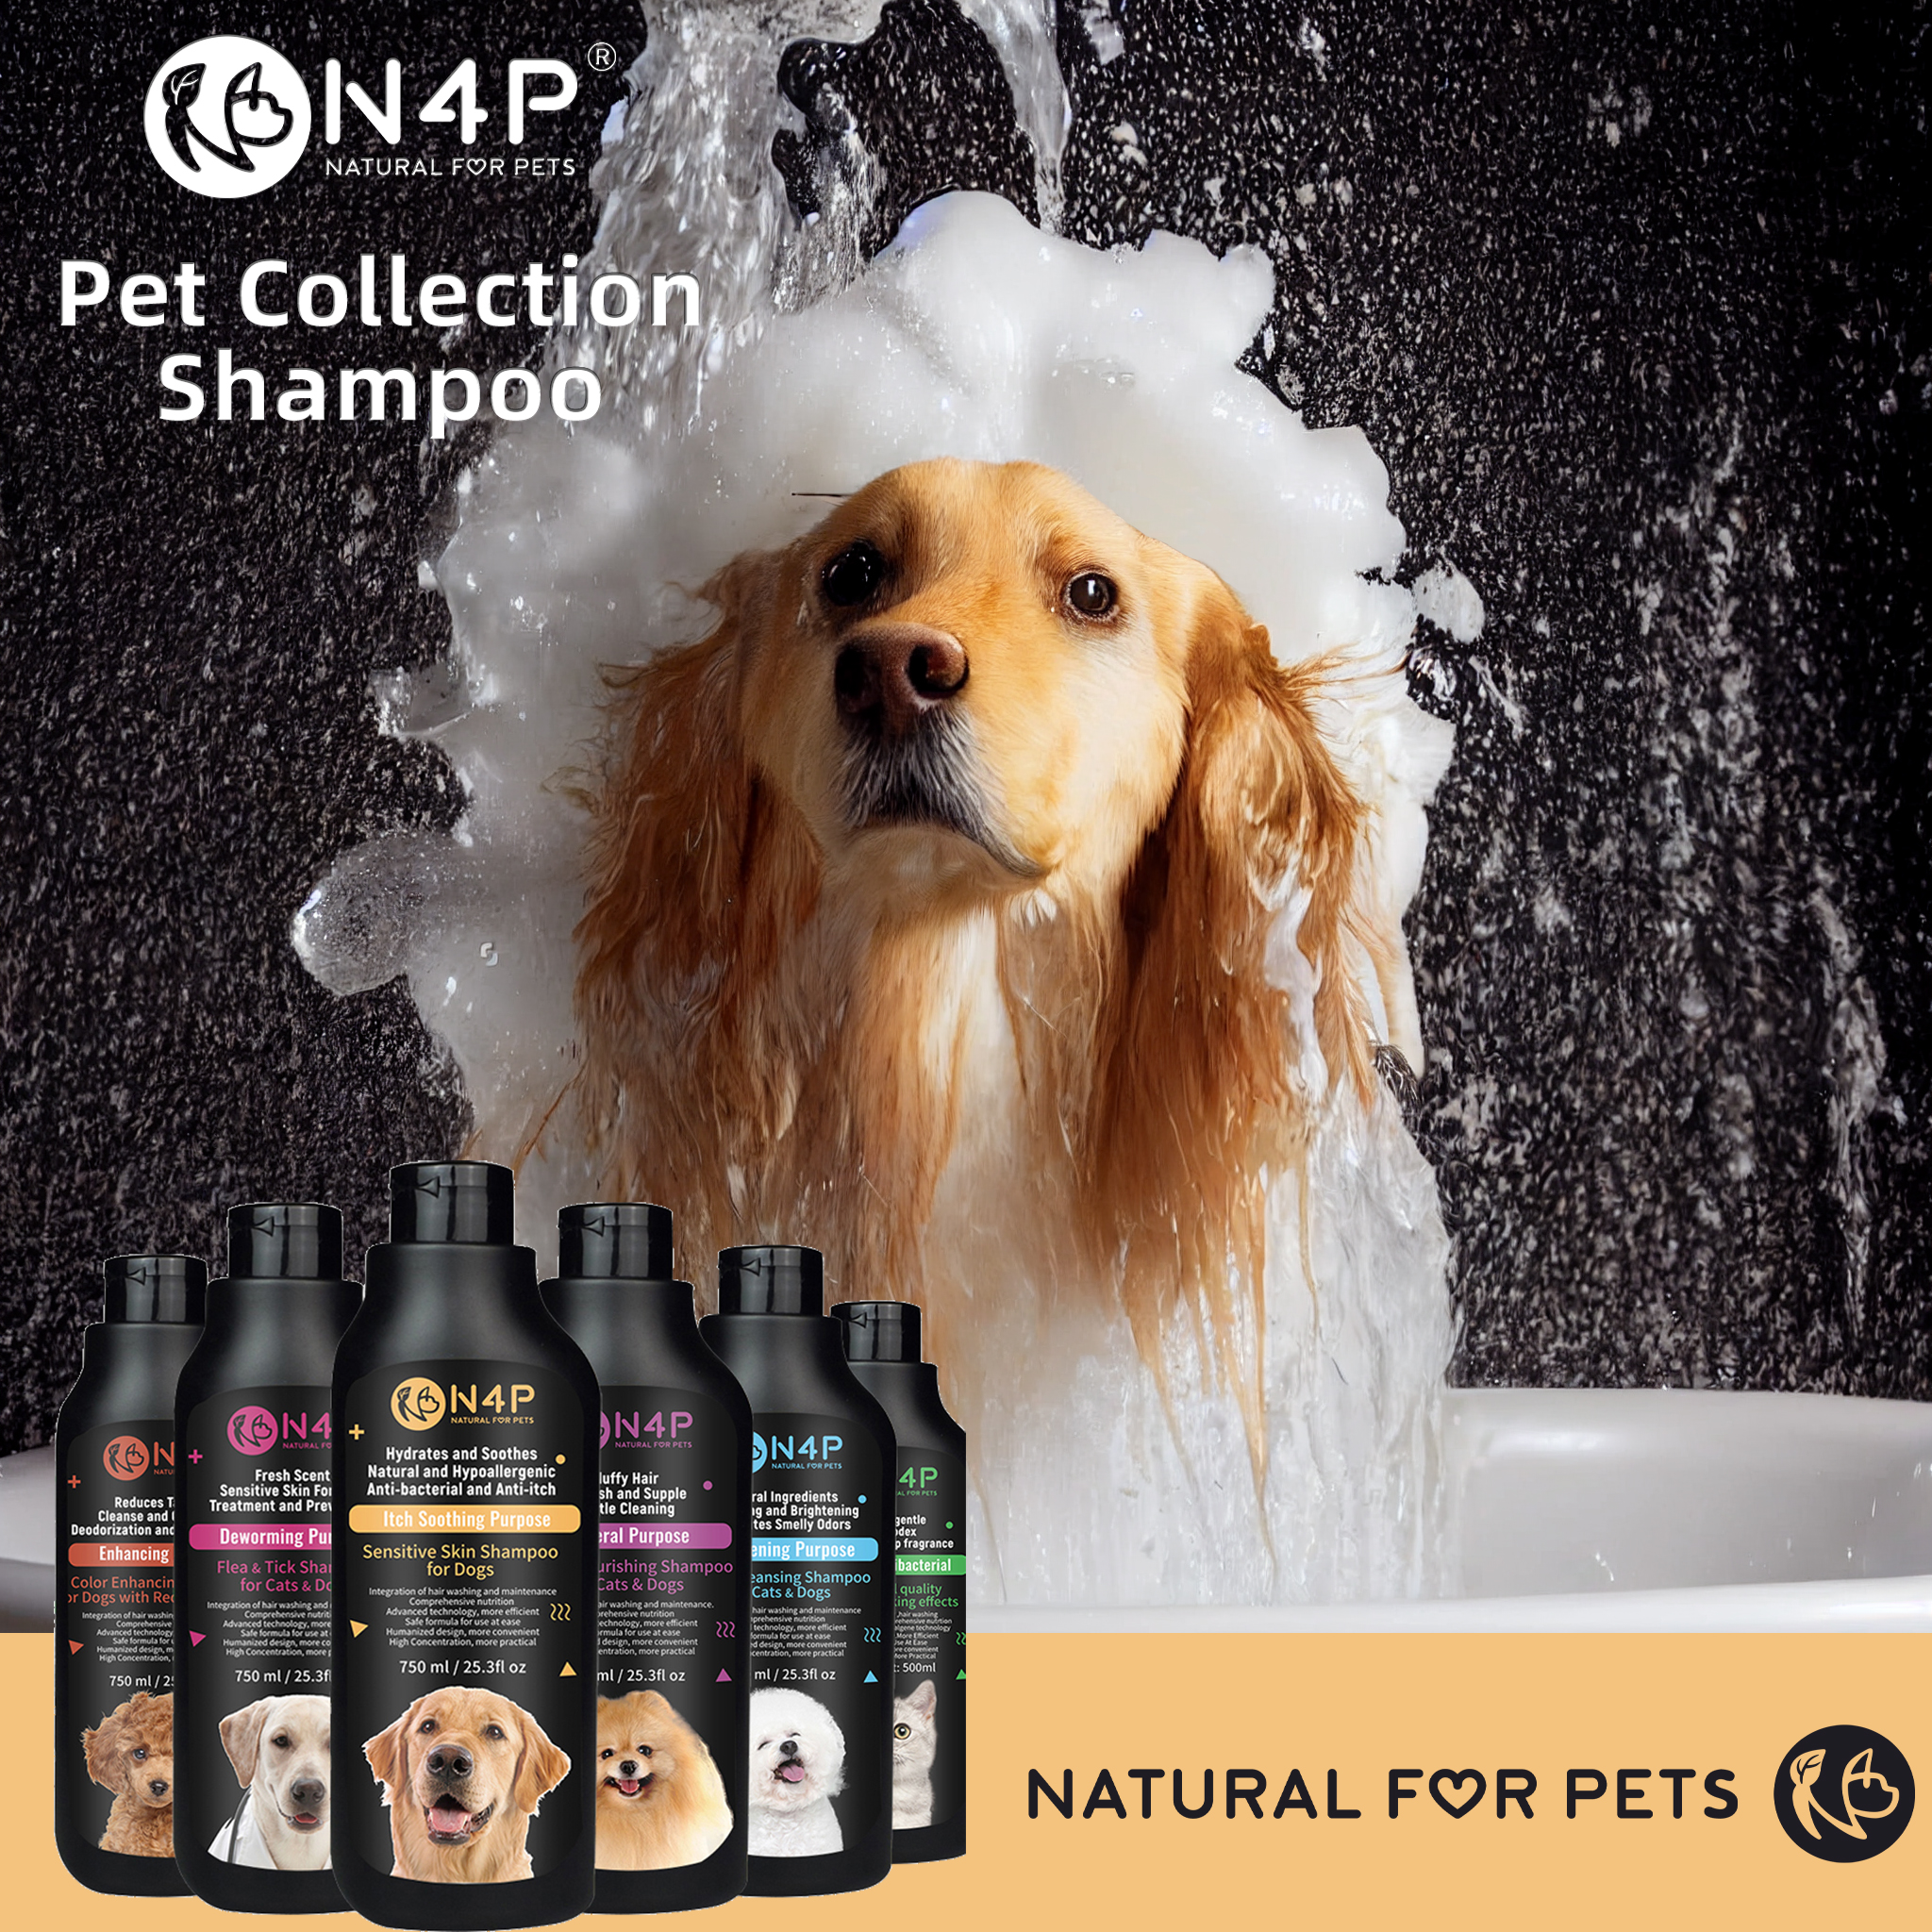 N4P: Your Go-To for Natural and Pet-Safe Grooming Essentials